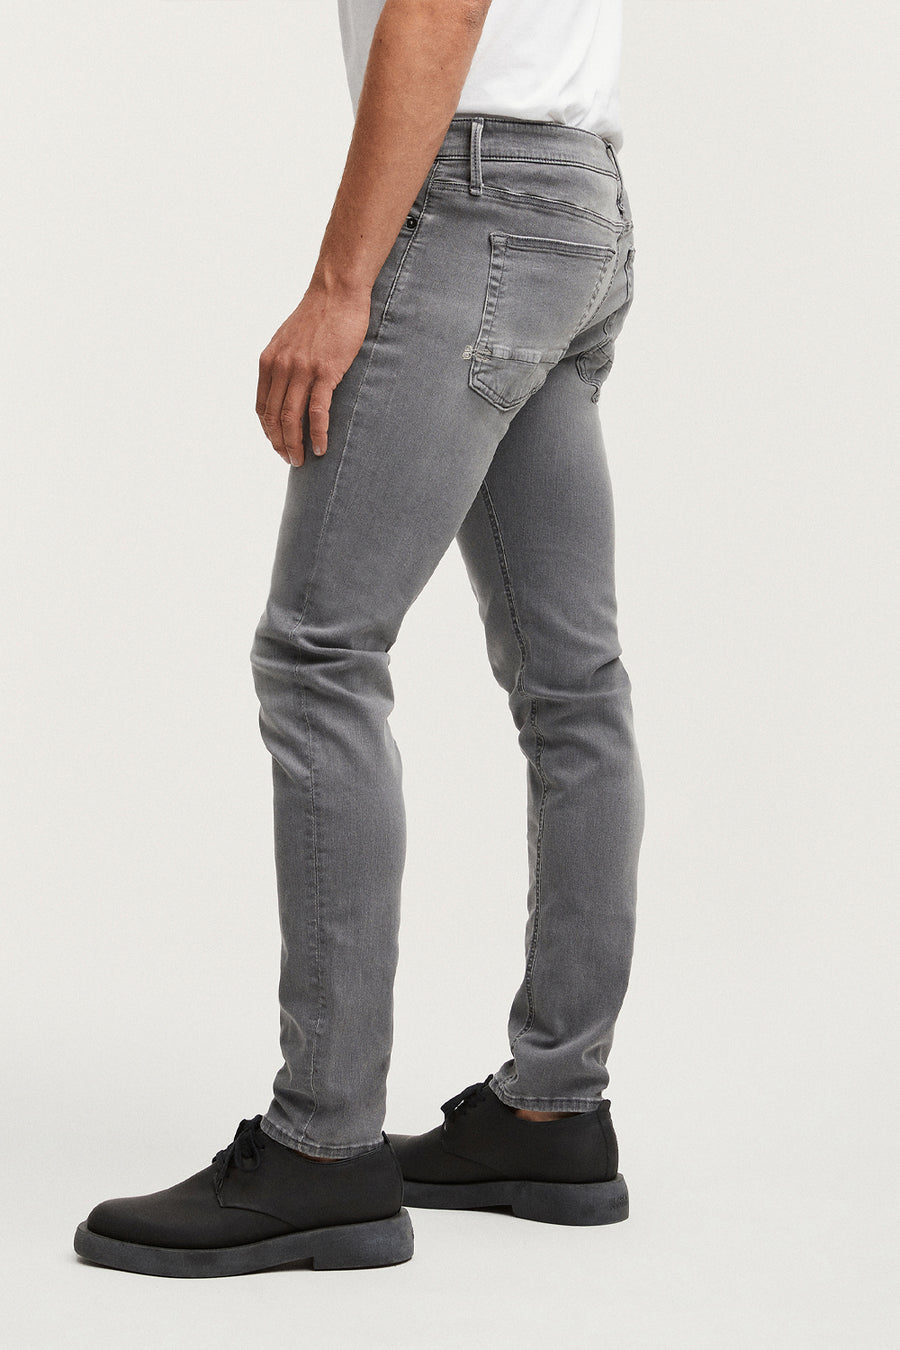 Buy the Denham Bolt Subtle Fade Denim Jean in Grey at Intro. Spend £50 for free UK delivery. Official stockists. We ship worldwide.